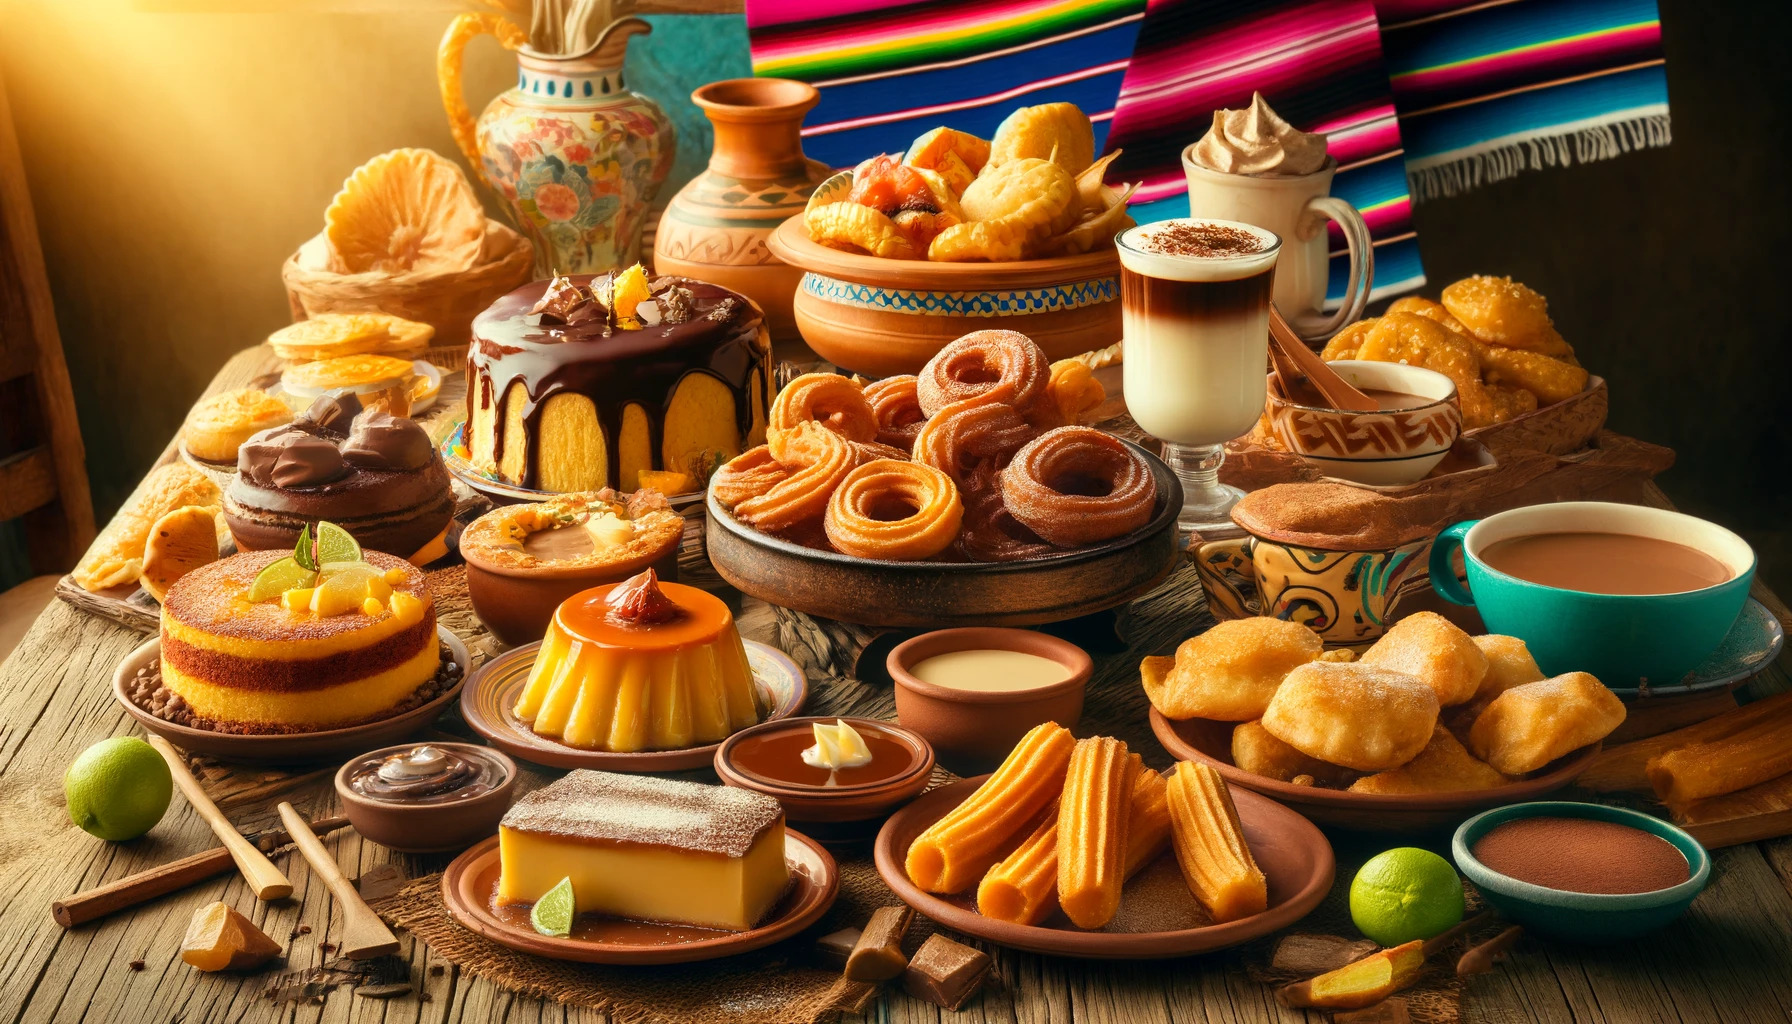 14 Tempting Mexican Desserts to Indulge Your Sugar Cravings